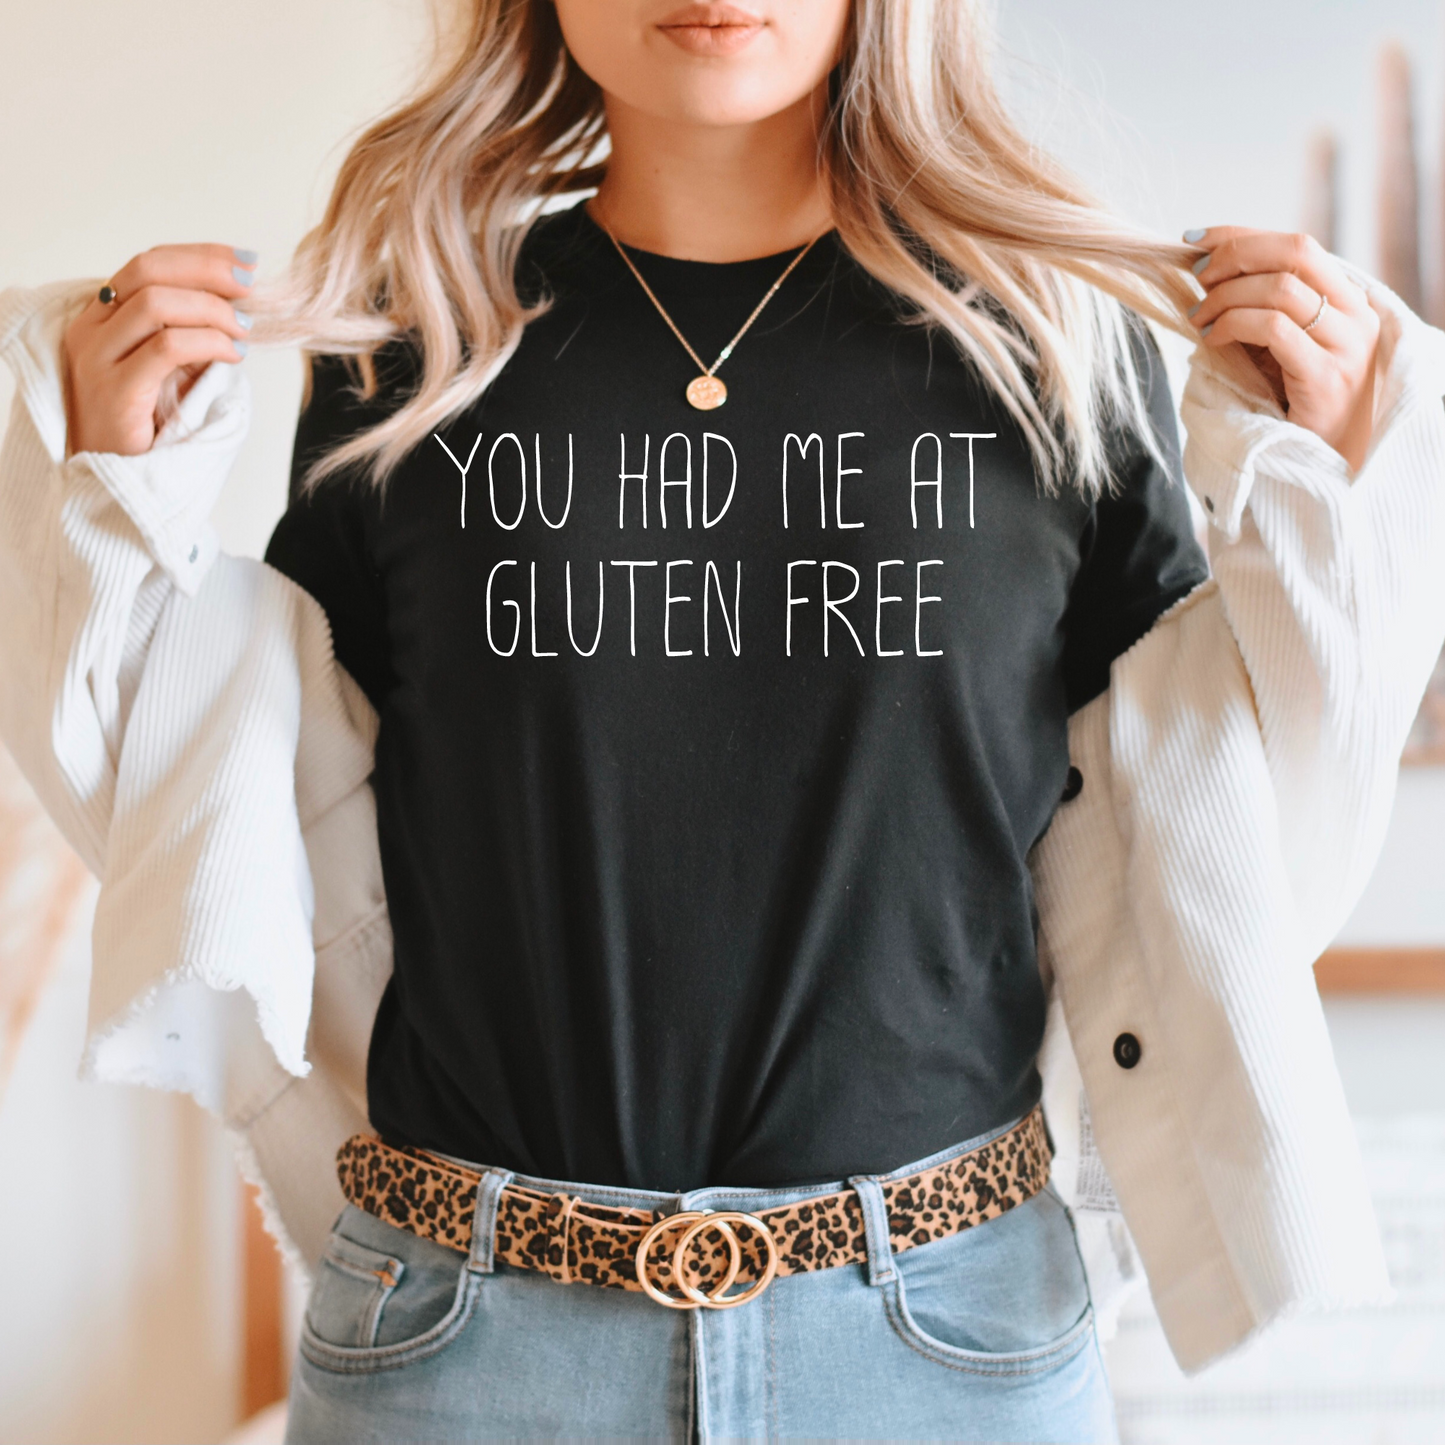 You had me at Gluten Free